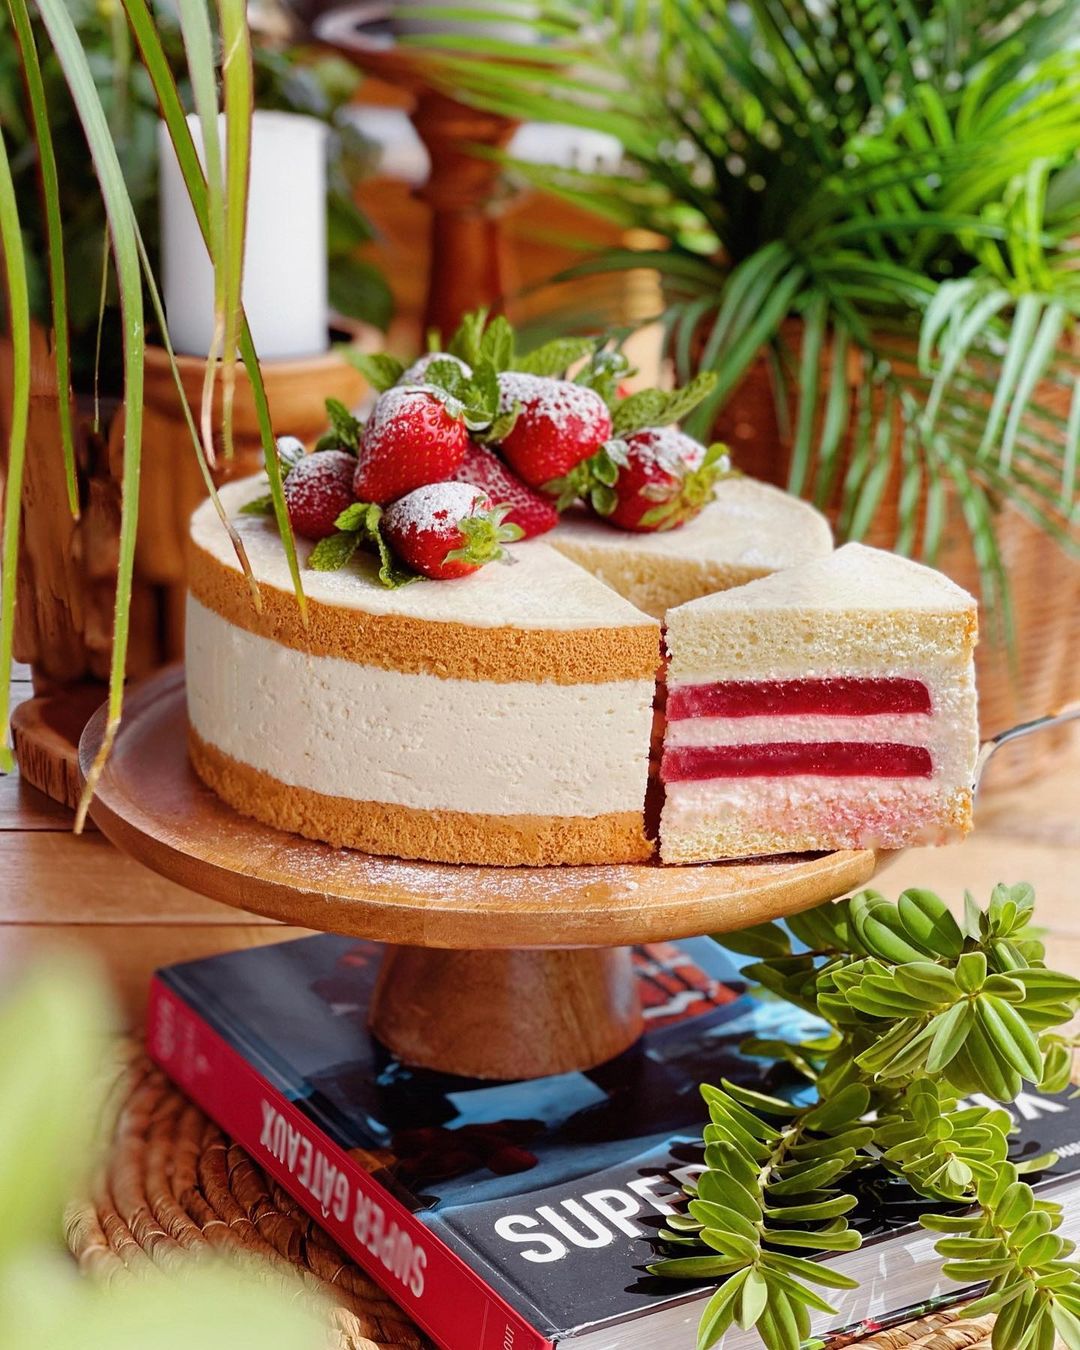 Sponge cake with cheese & strawberry